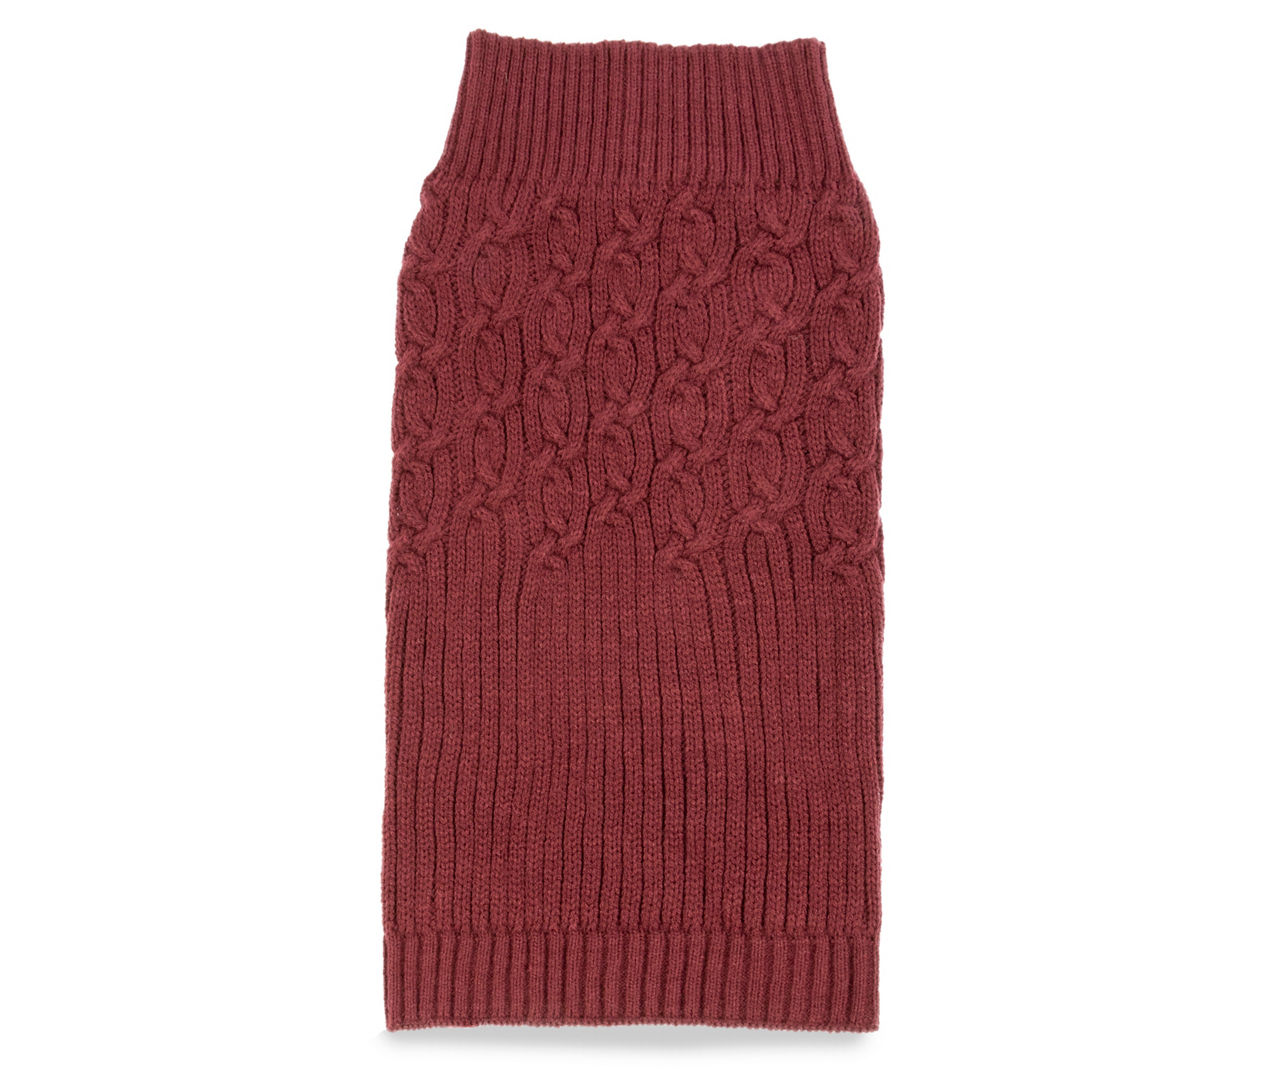 Pet X-Large Red Classic Cable Knit Sweater